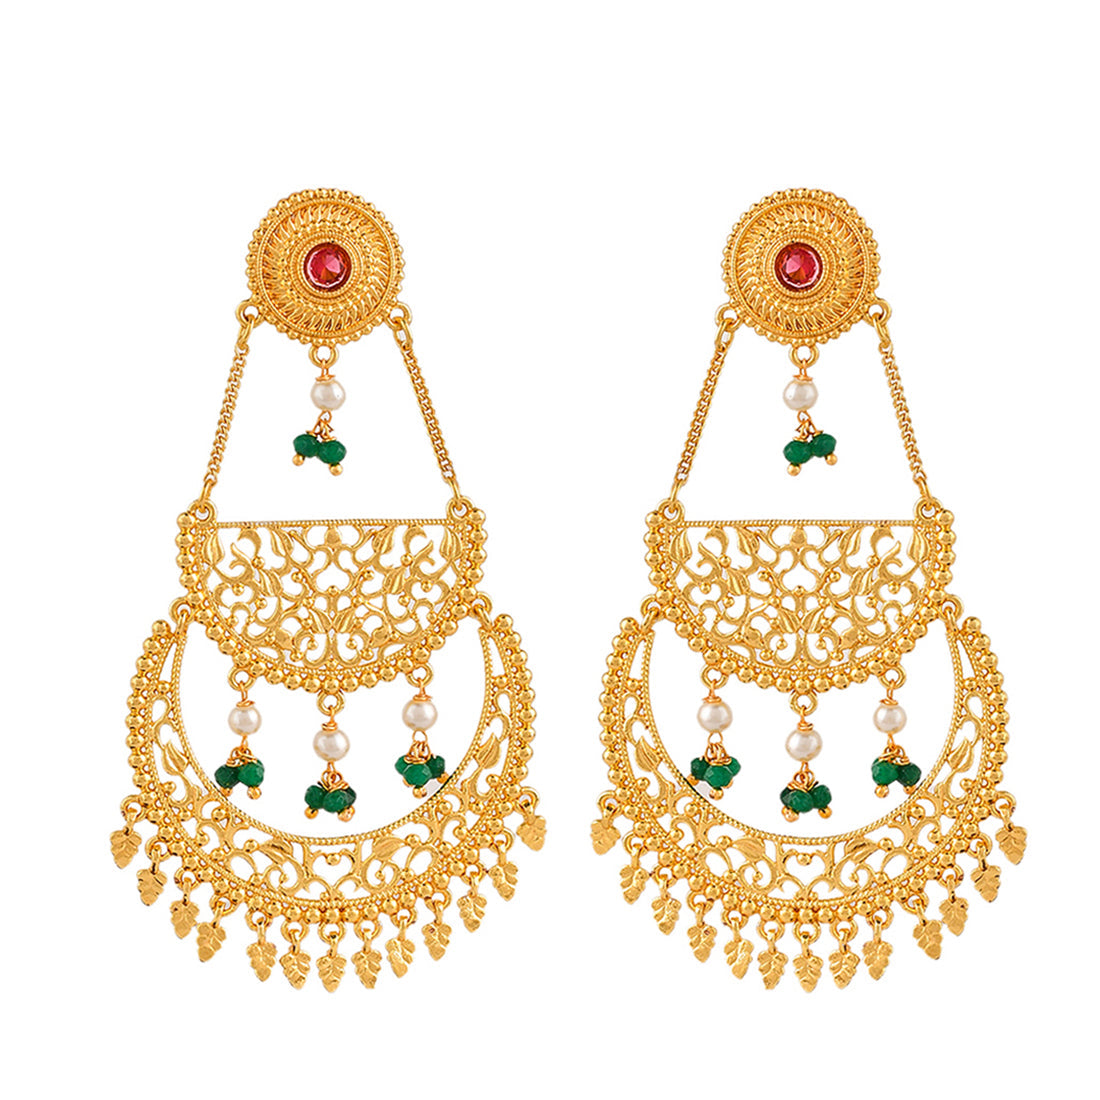 Women's Abharan Red Stones And Pearls Layered Ethnic Drop Earrings - Voylla